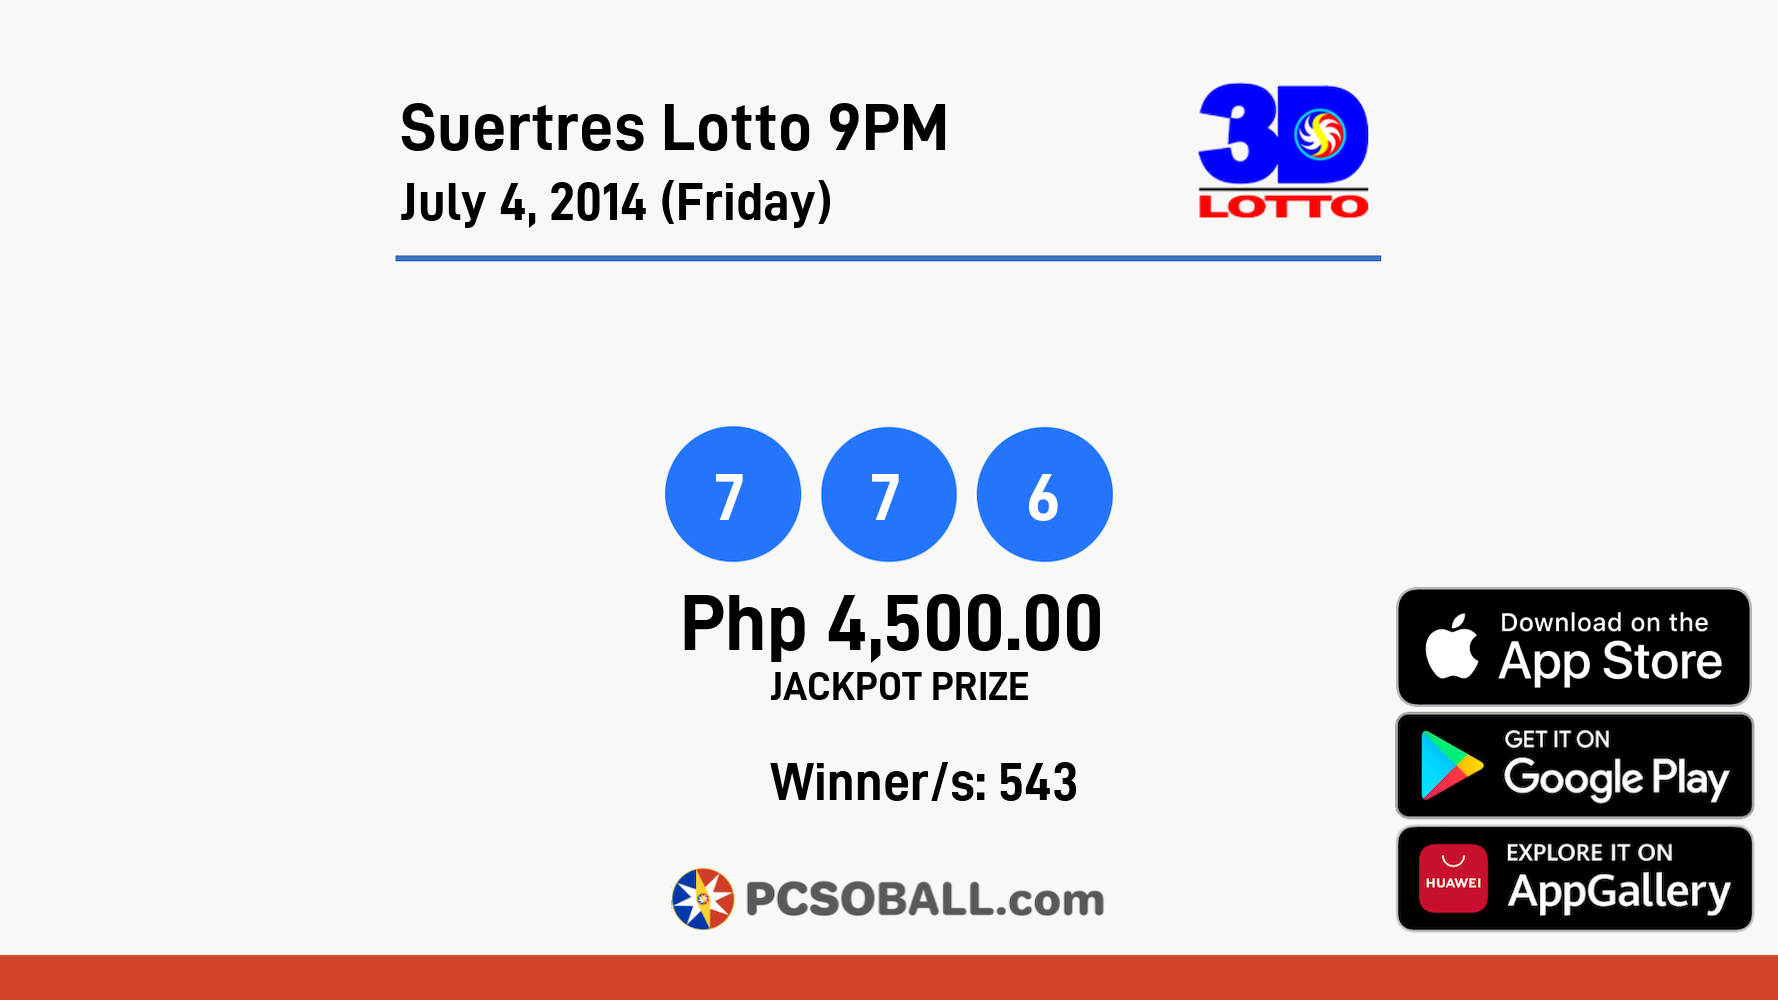 Suertres Lotto 9PM July 4, 2014 (Friday) Result